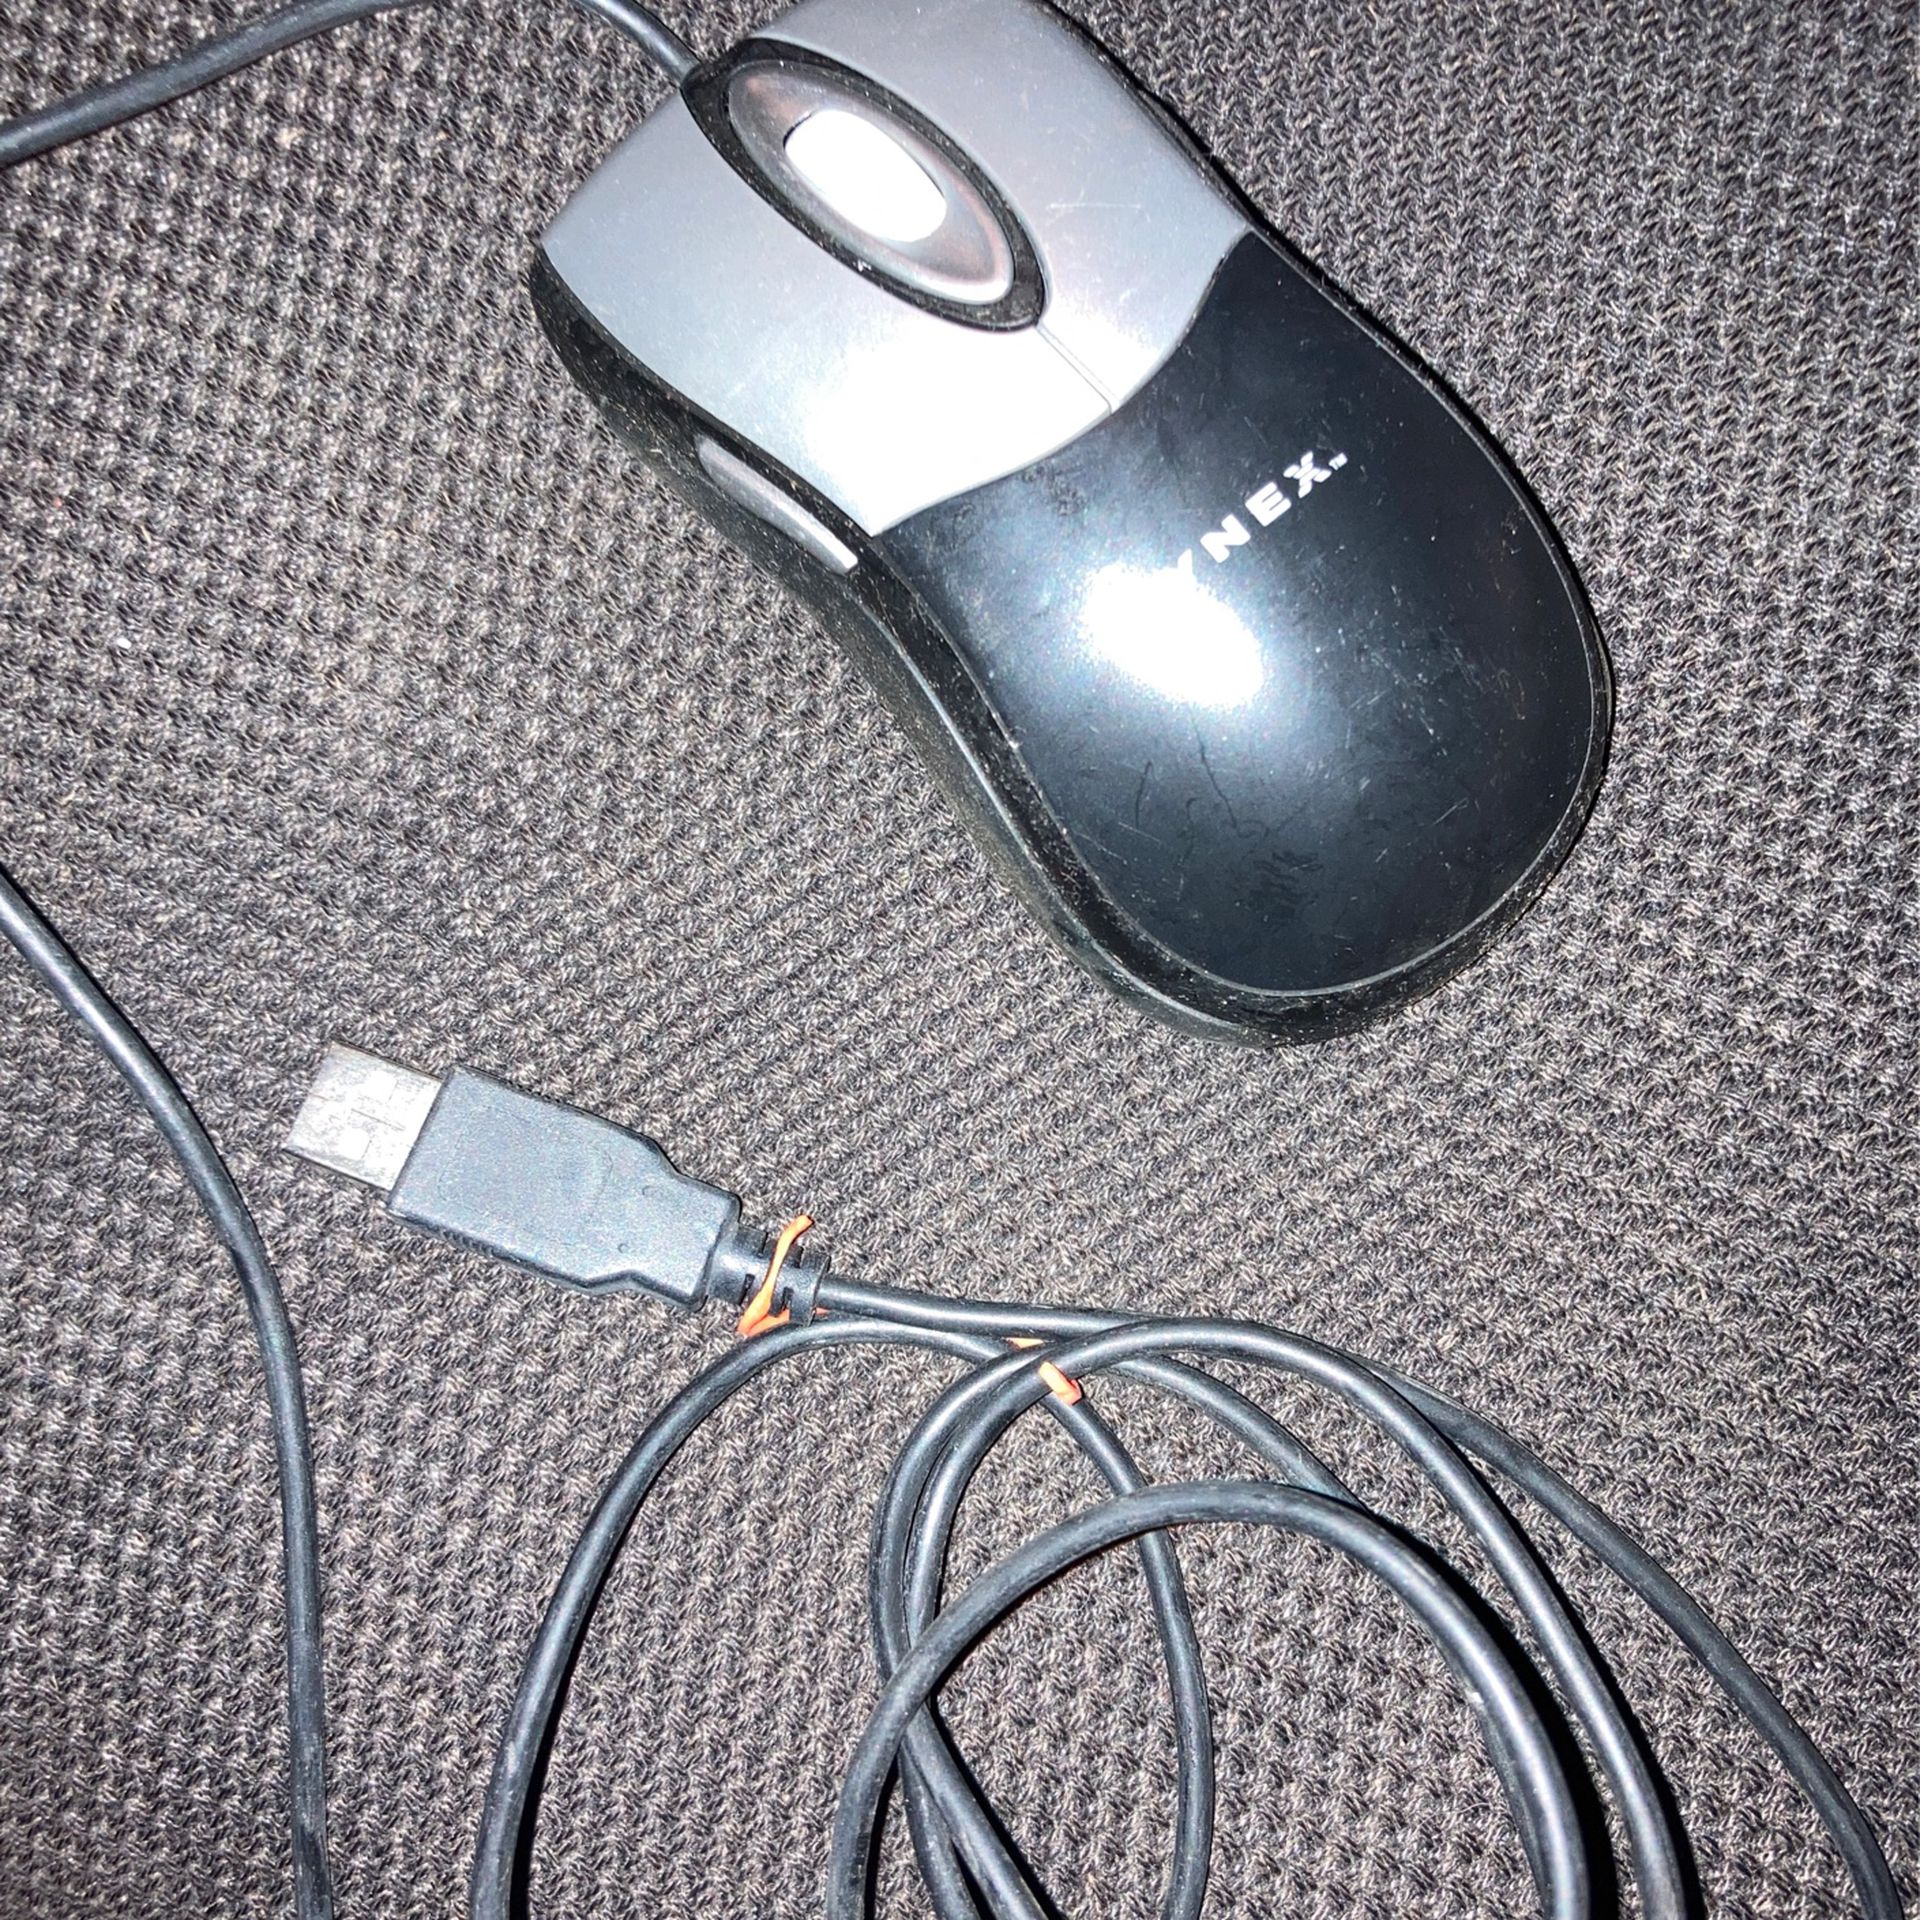 FREE Dynex USB Computer Mouse